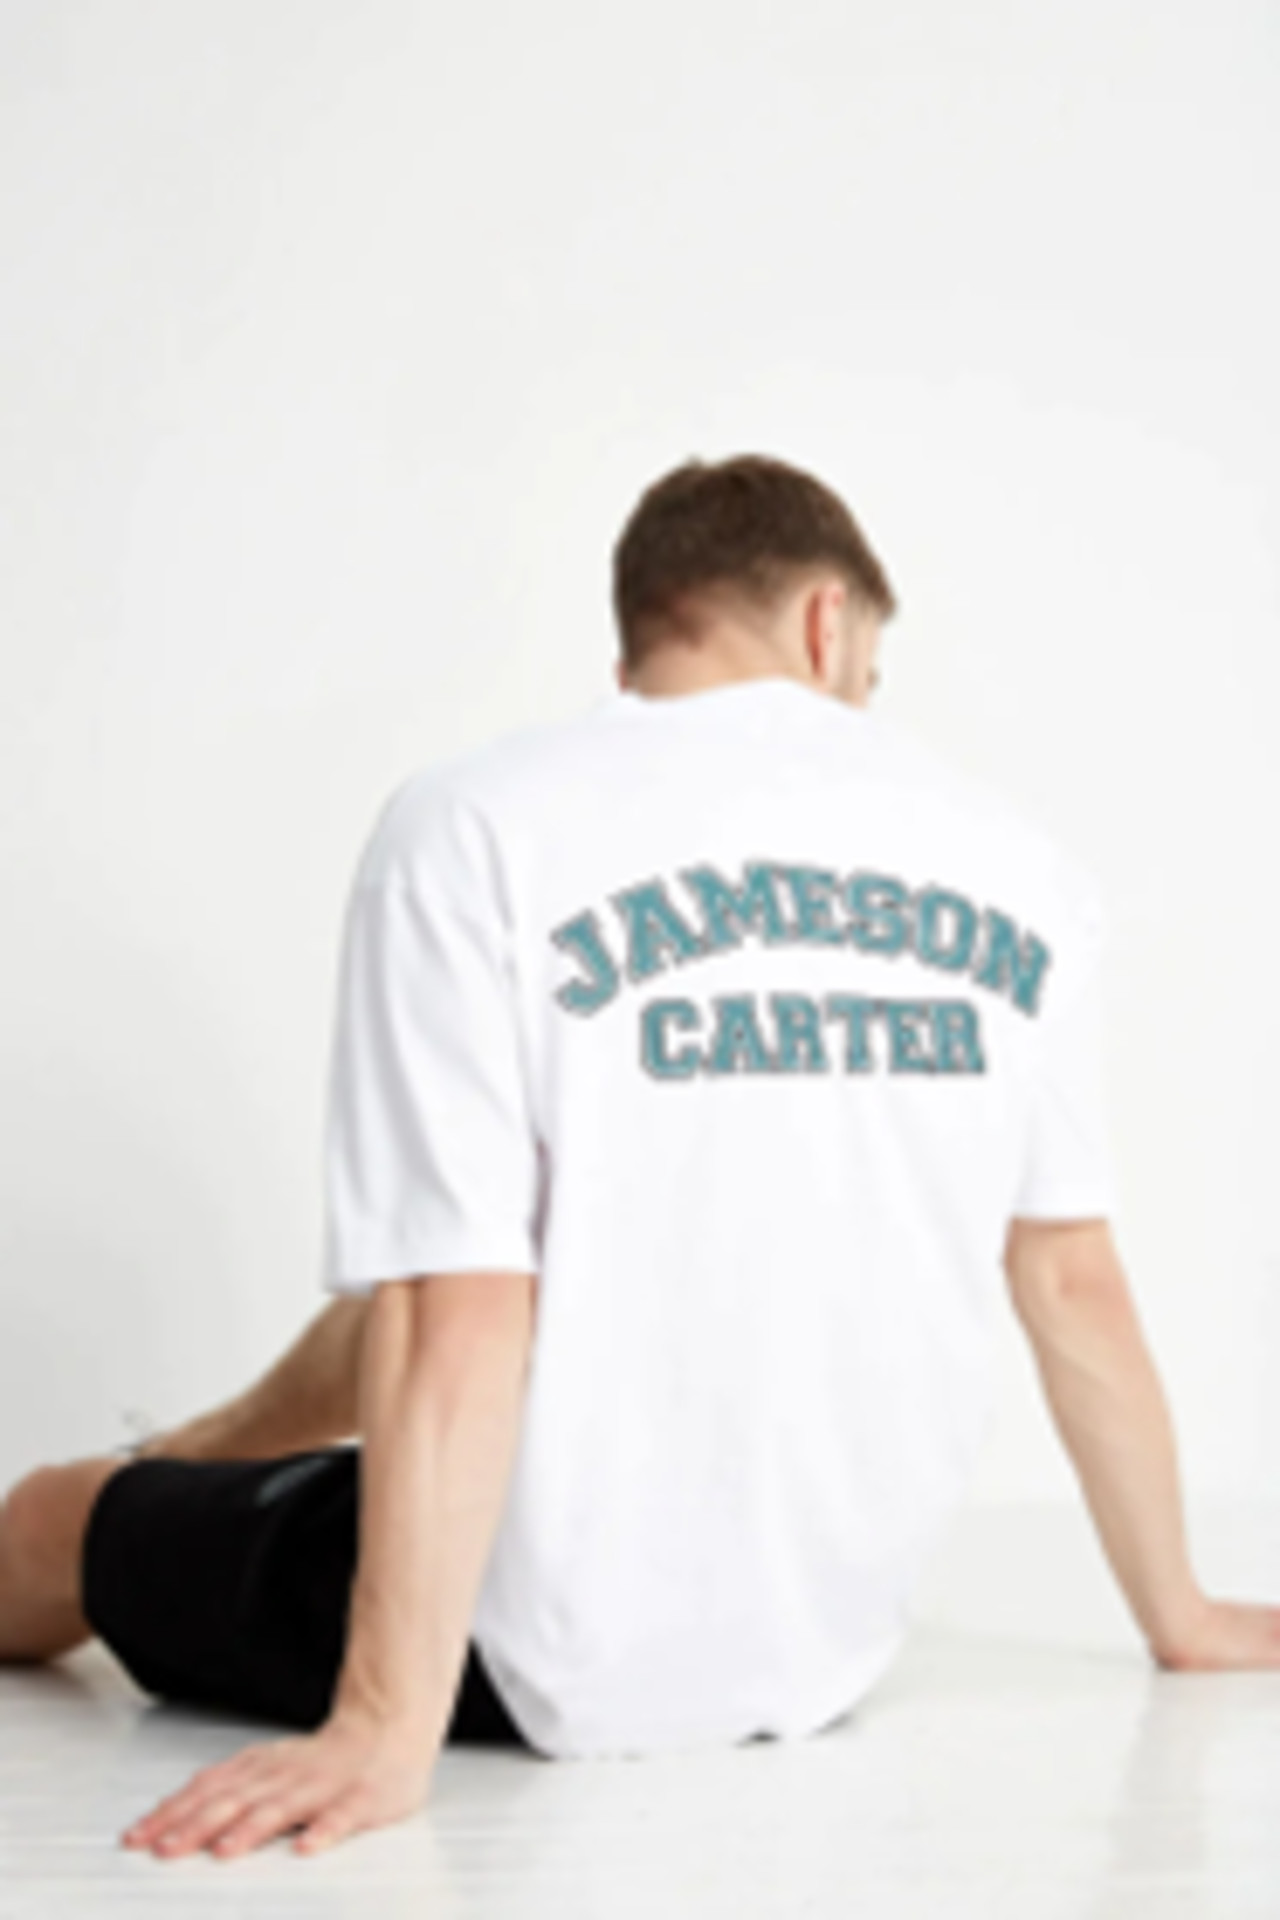 TRADE LOT 100 x NEW MIXED ITEMS OF JAMESON CARTER STOCK. TO INCLUDE ITEMS SUCH AS: JACKETS,